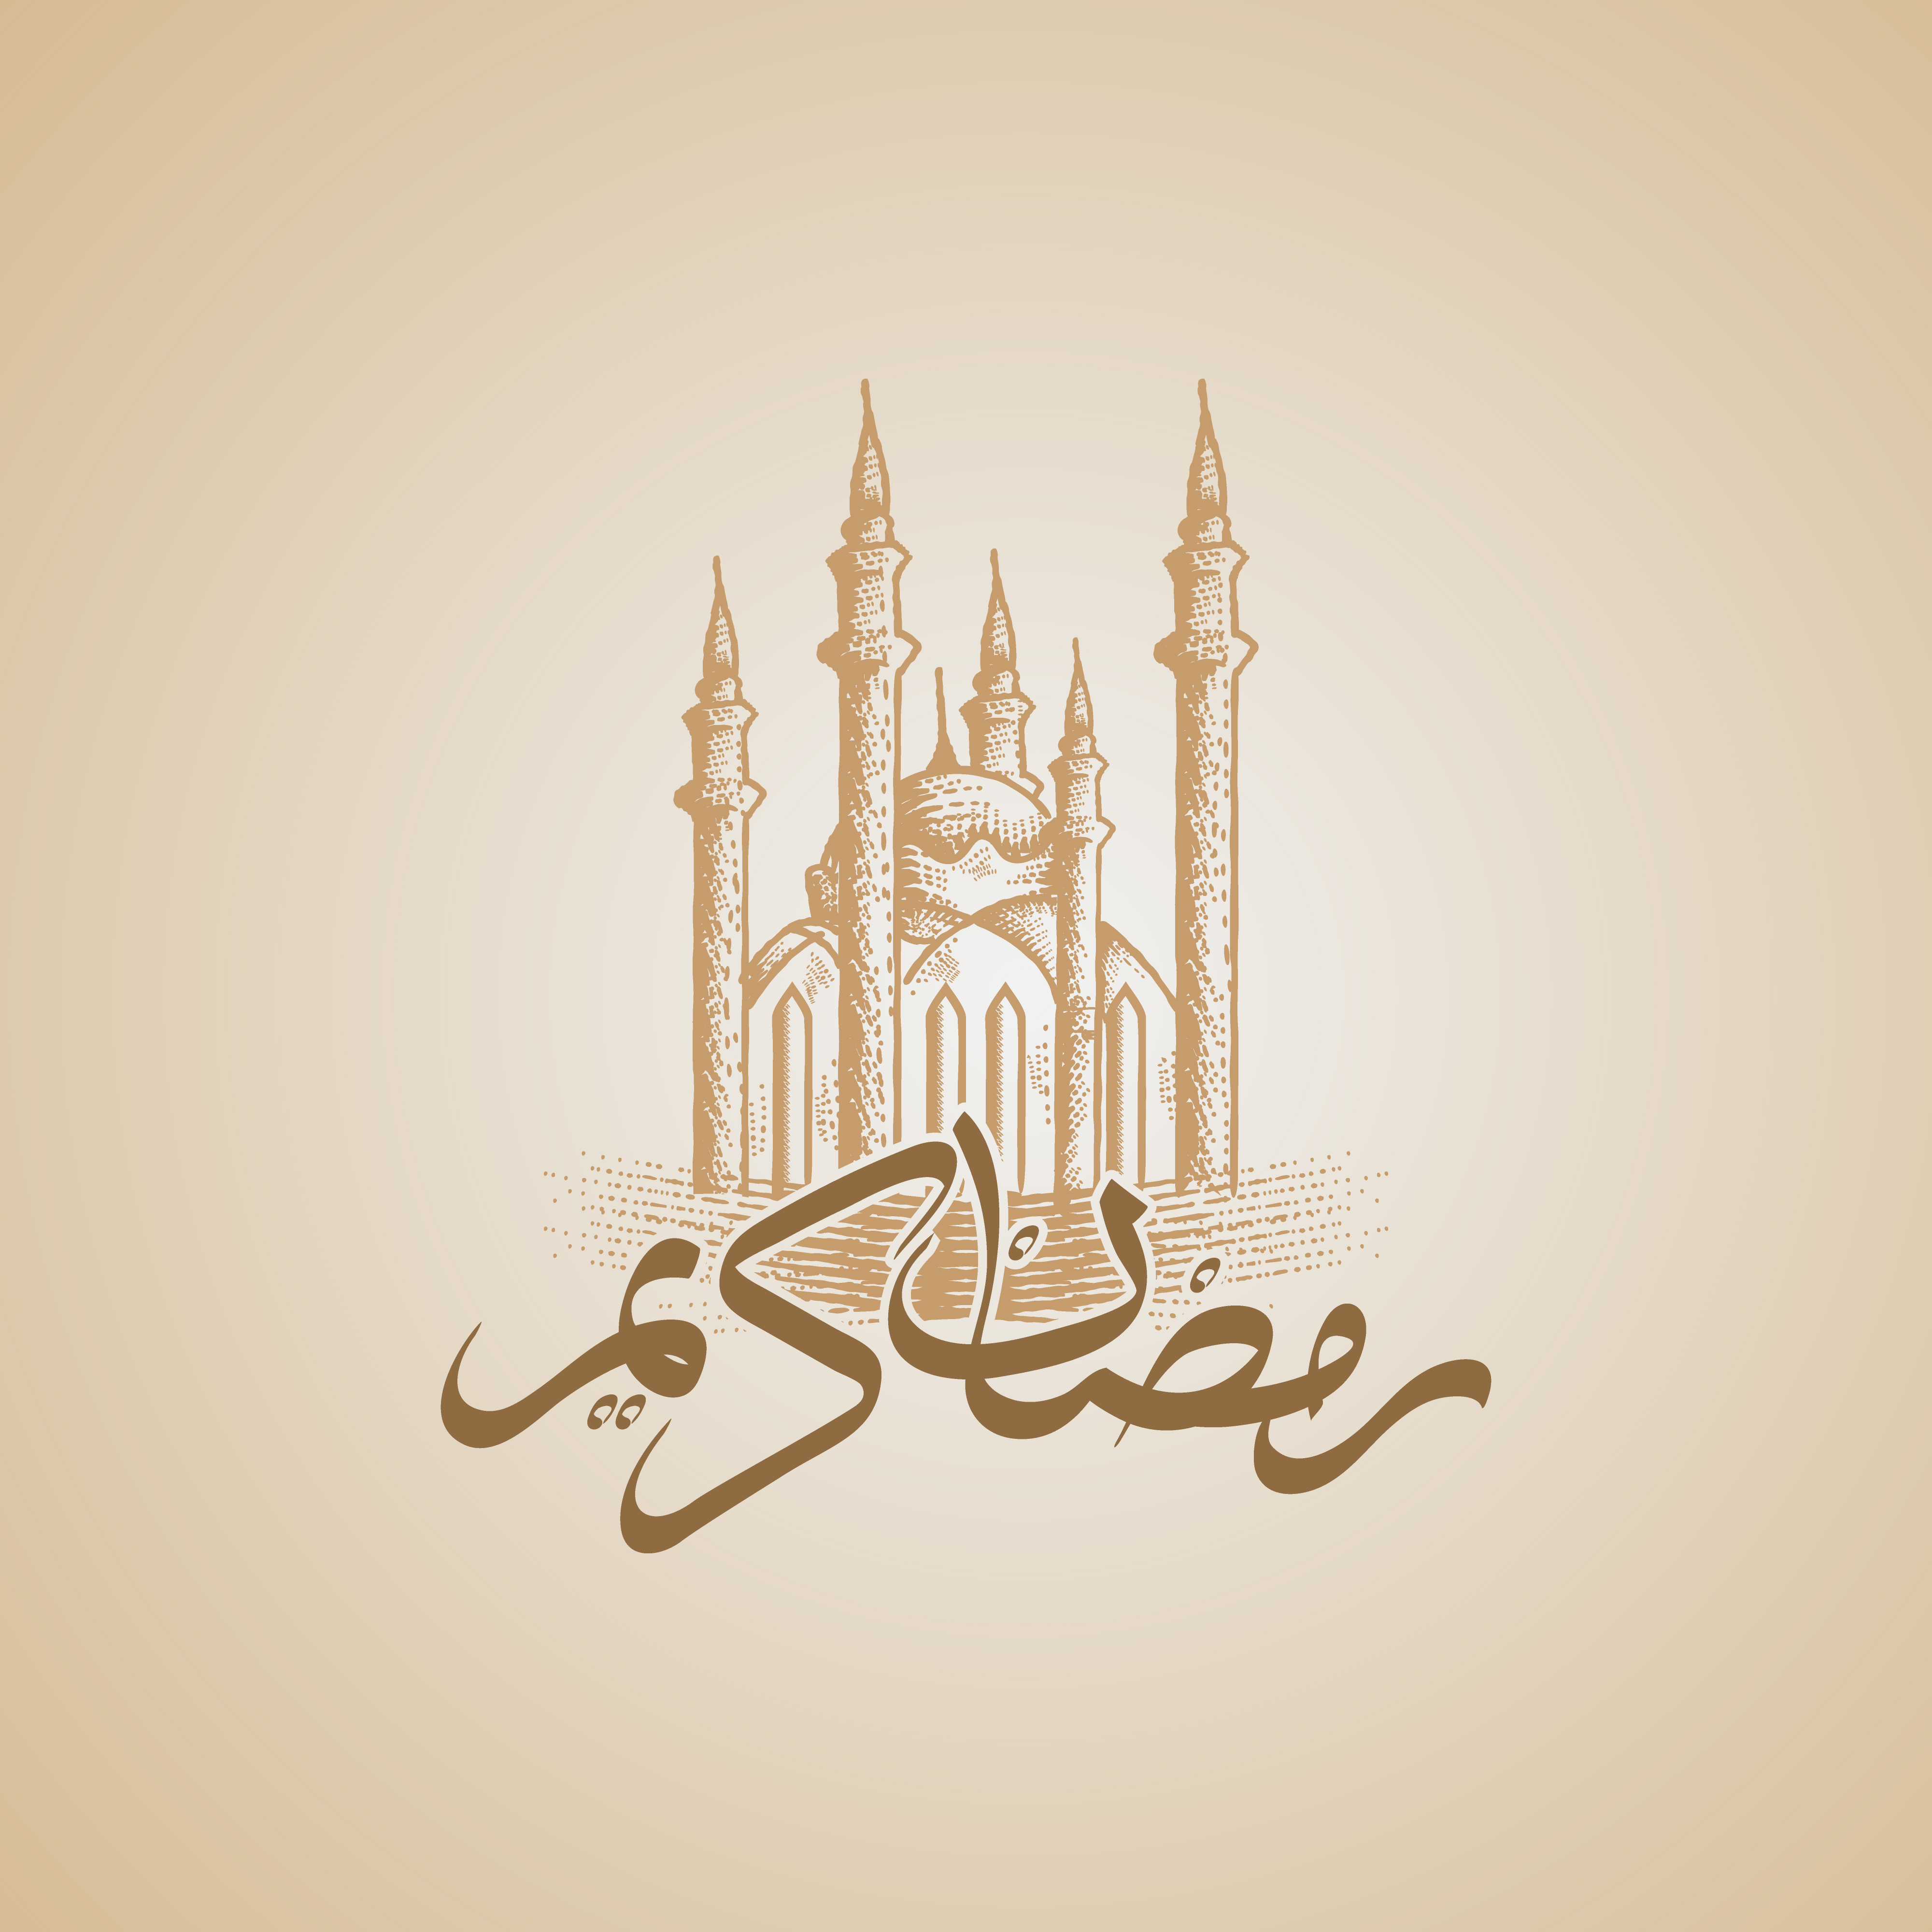 Ramadan Kareem greeting with mosque and calligraphy lettering 1310859